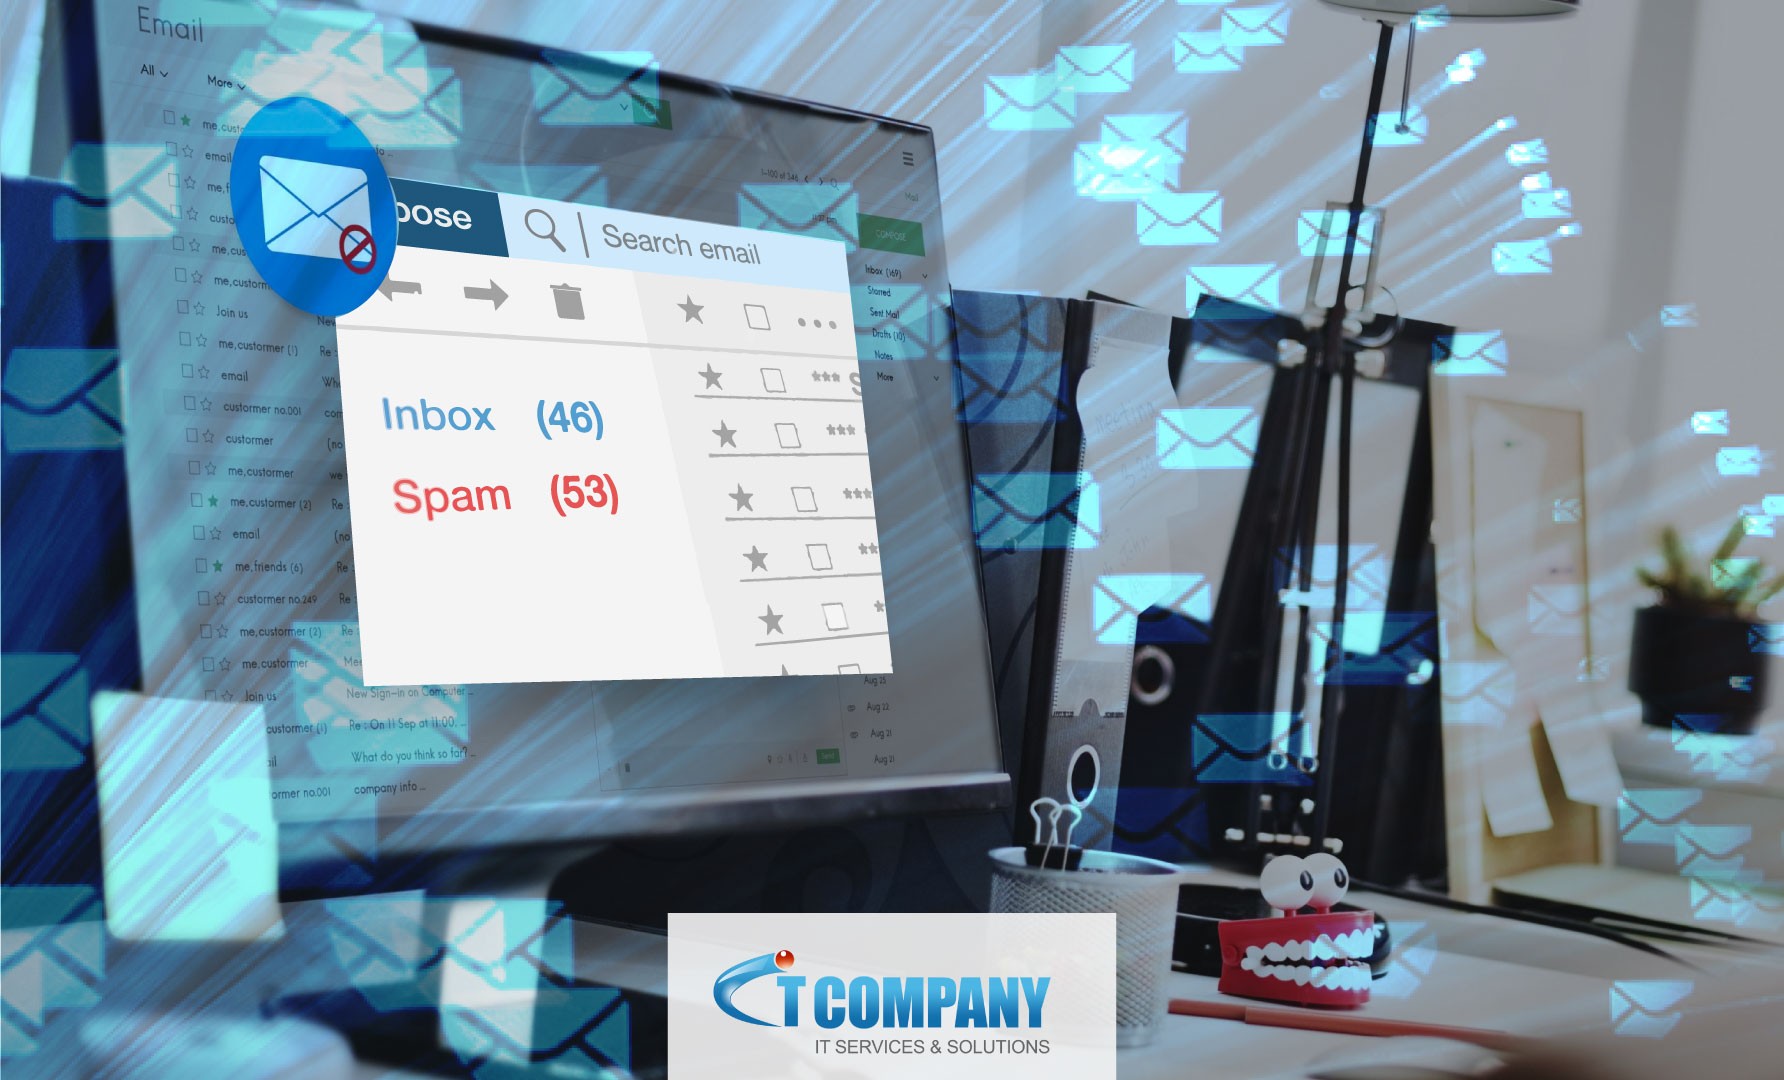 Spam Emails: This could be quite a convenient way to detect them!